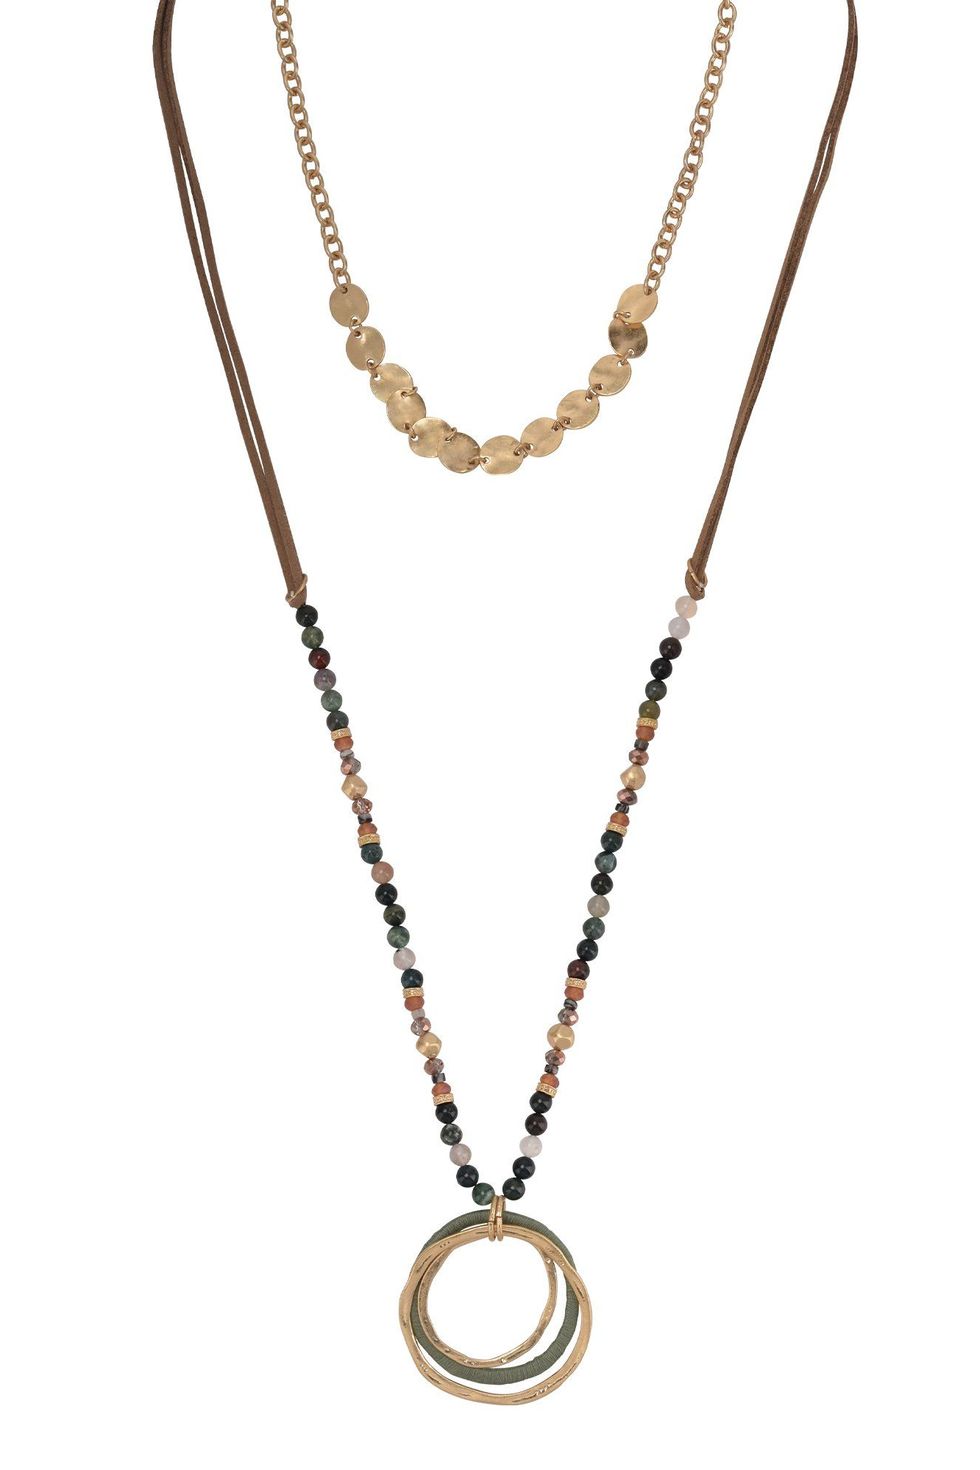 The Pioneer Woman Jewelry, Soft Gold-Tone Duo Necklace Set with Genuine Stone Beads